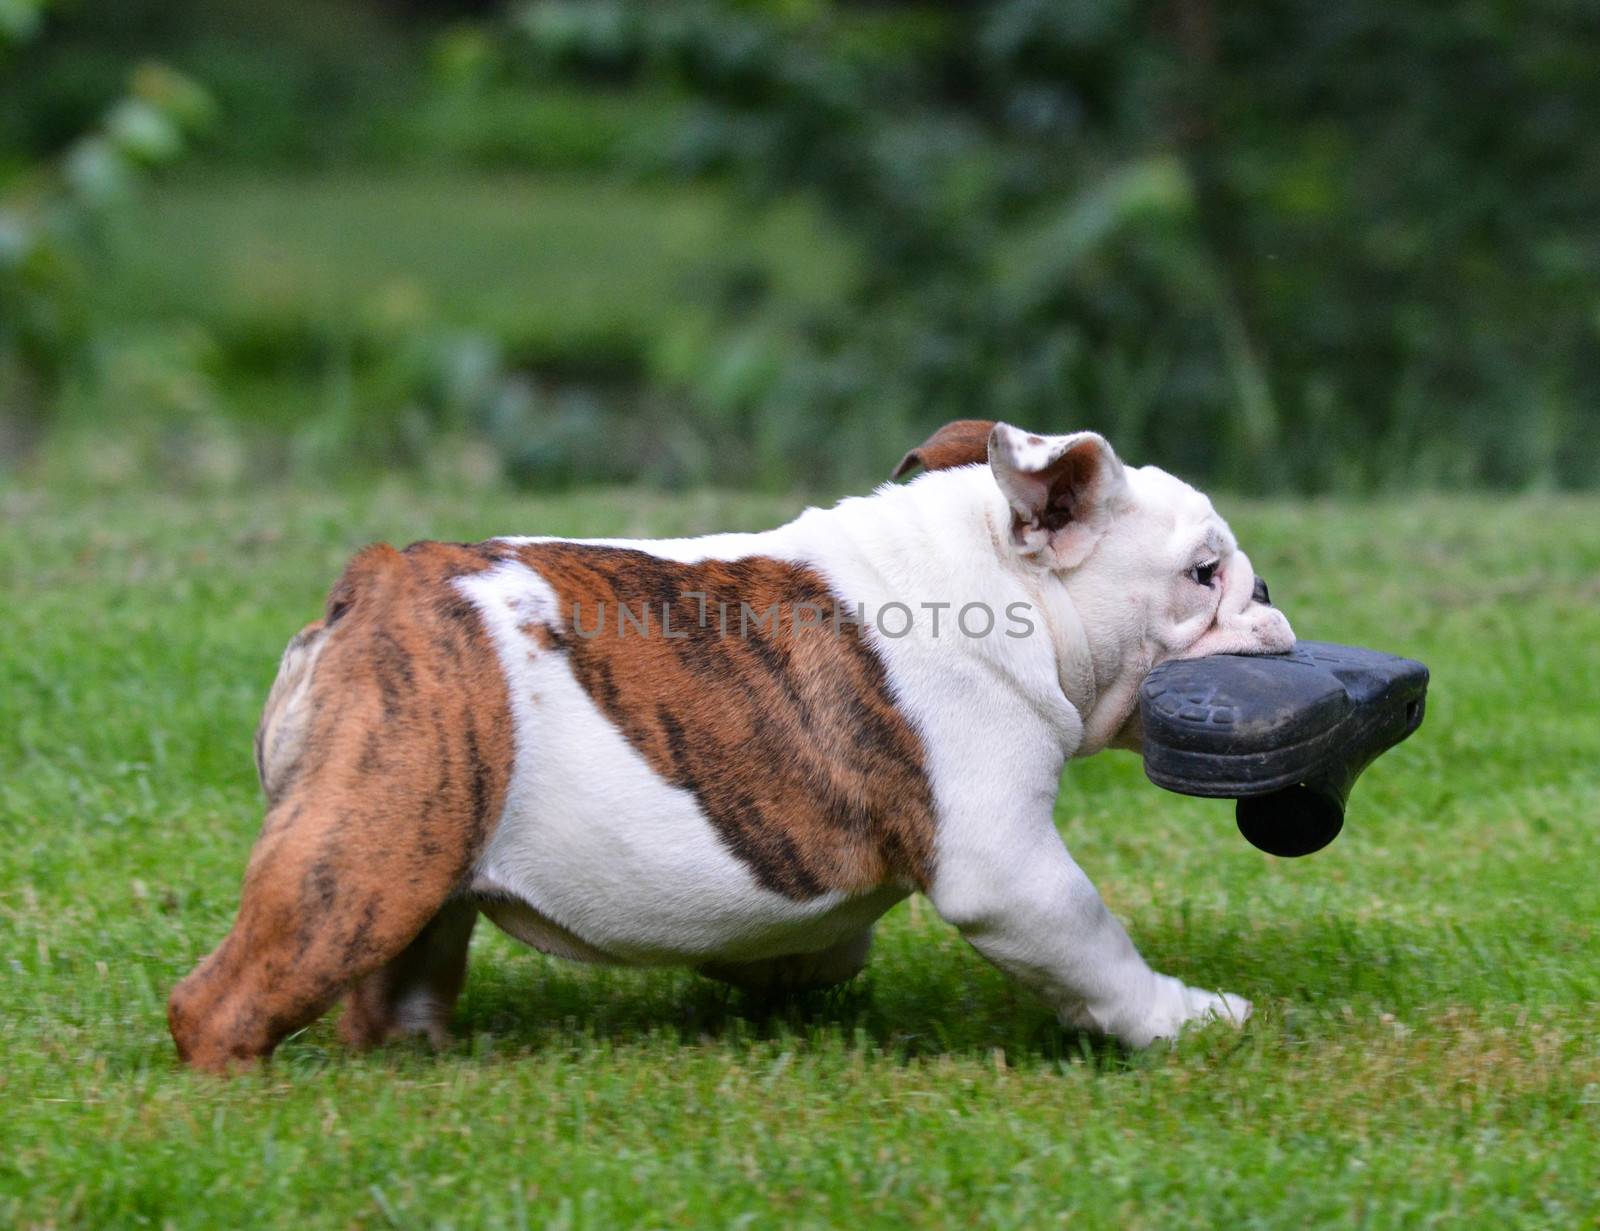 dog stealing shoe by willeecole123